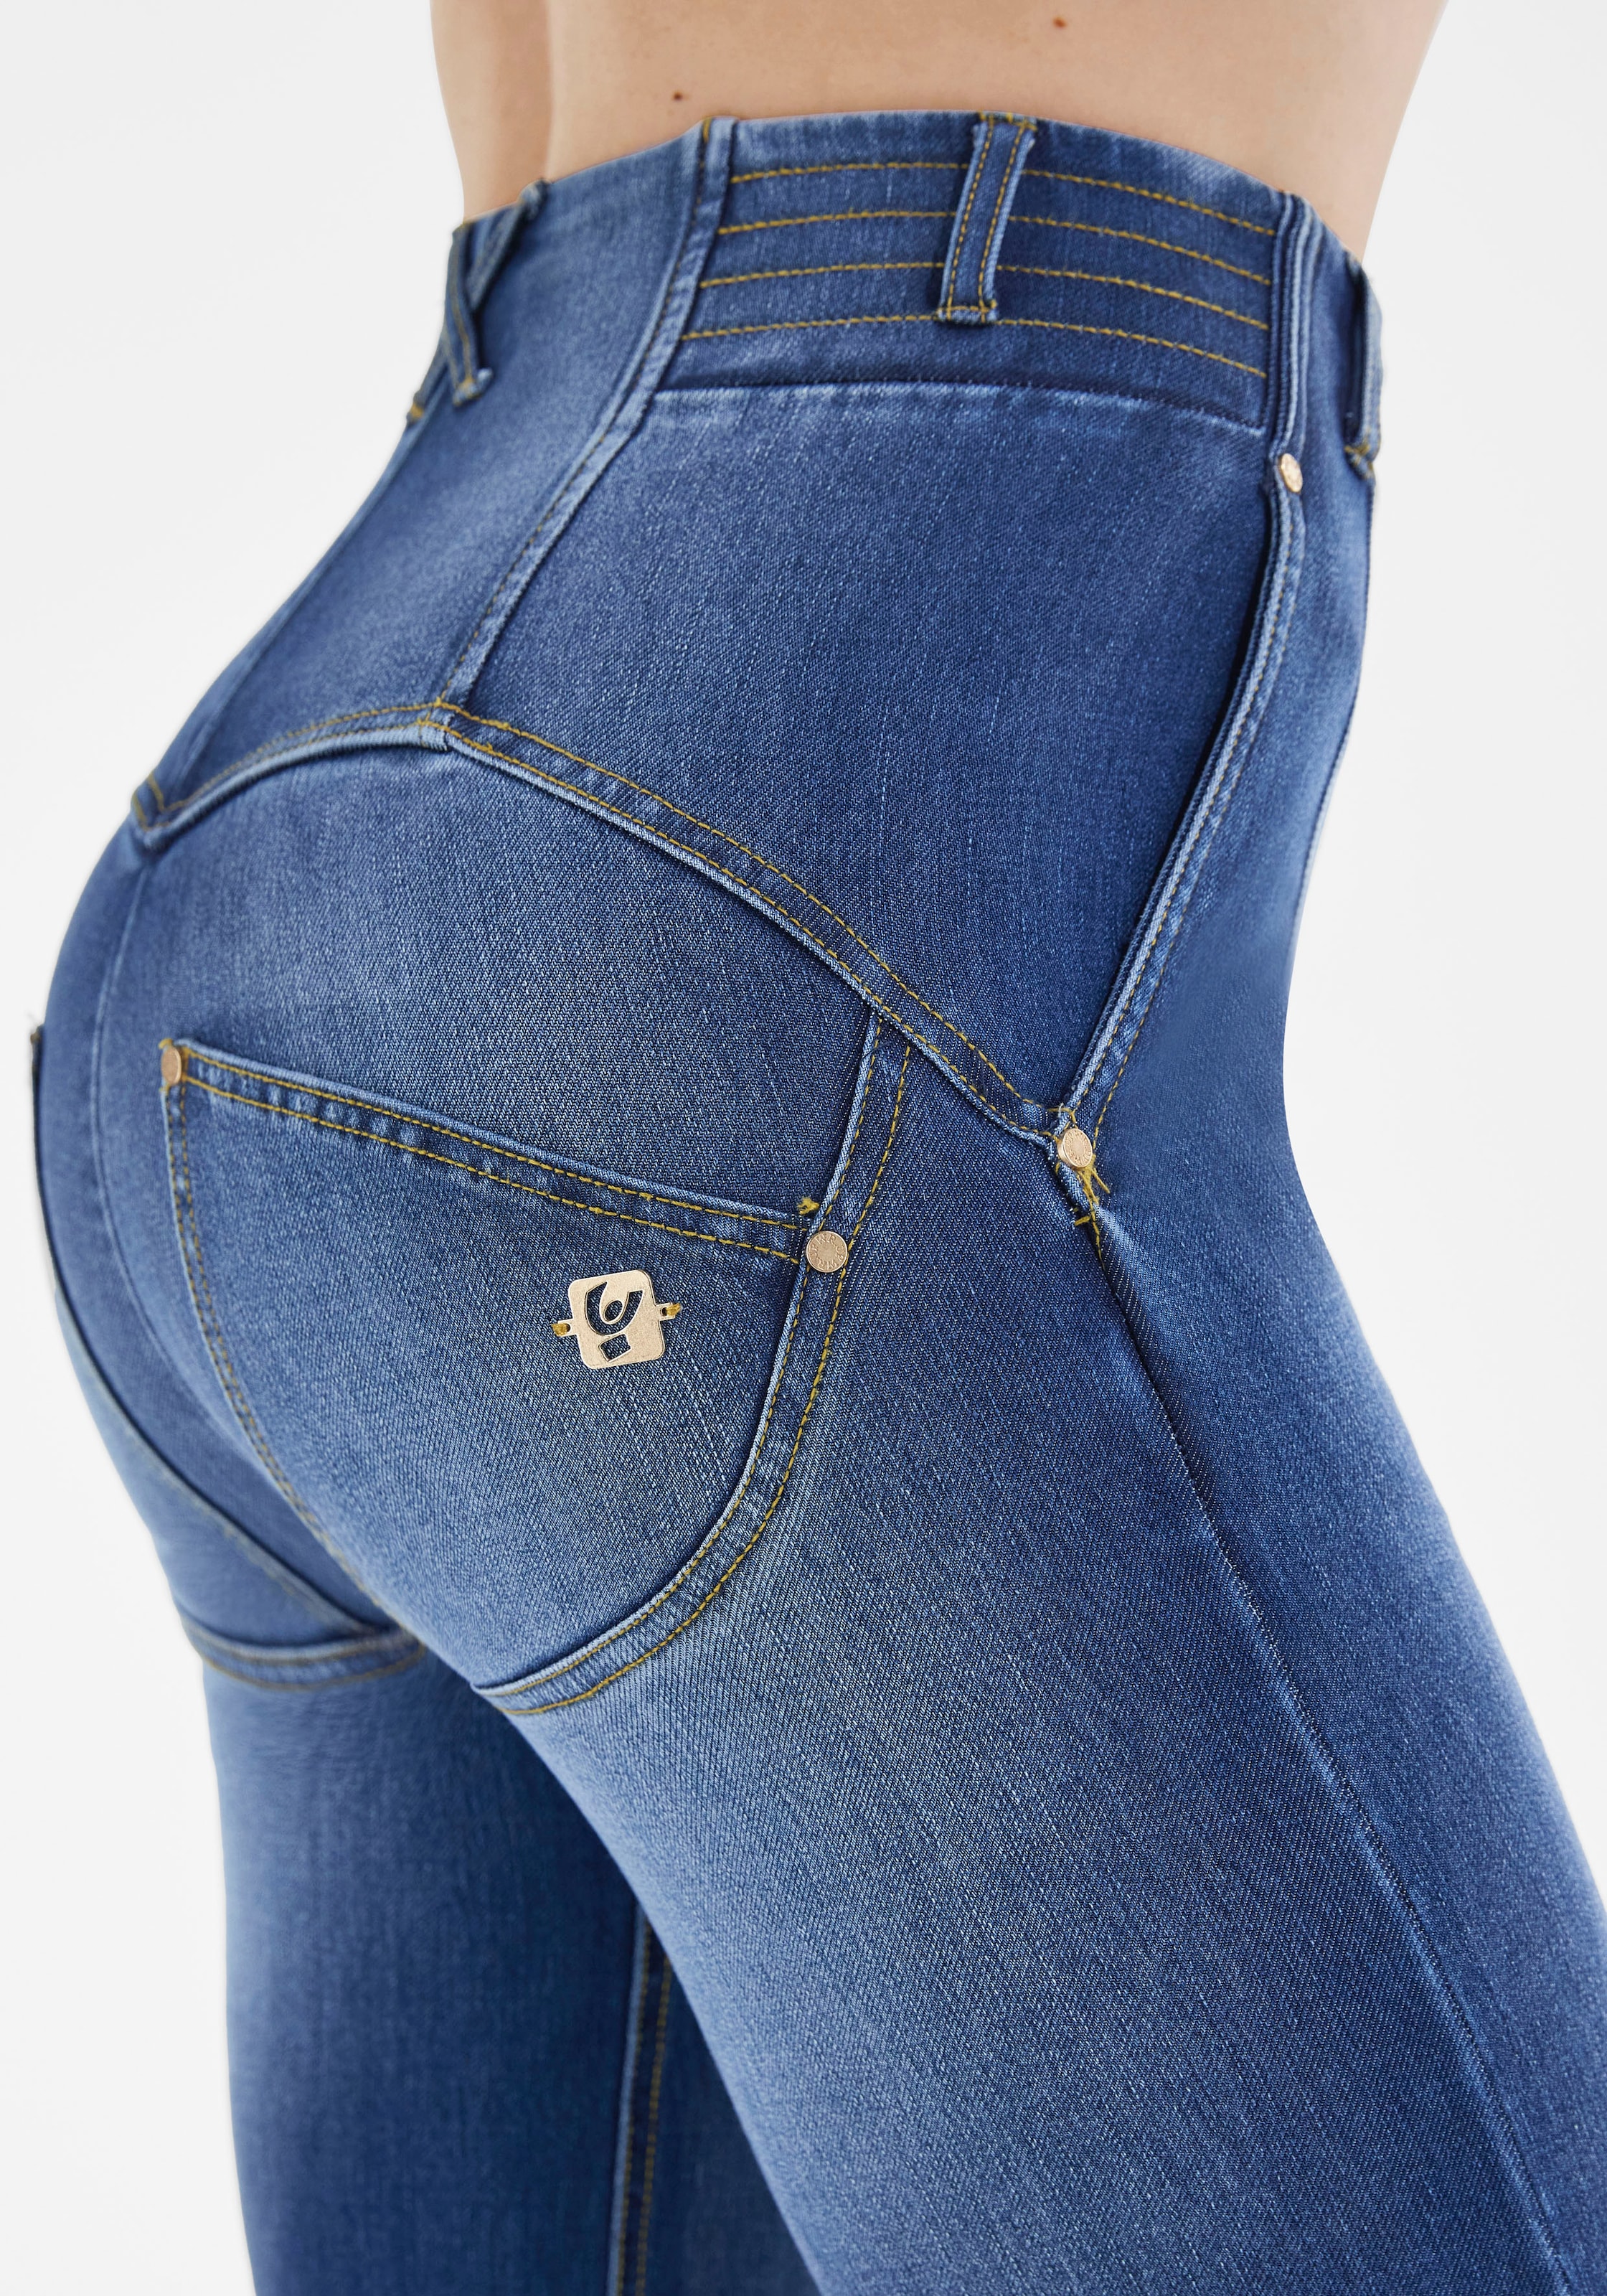 Lifting »WRUP & Effekt bei mit Freddy Skinny-fit-Jeans Shaping OTTOversand SUPERSKINNY«,